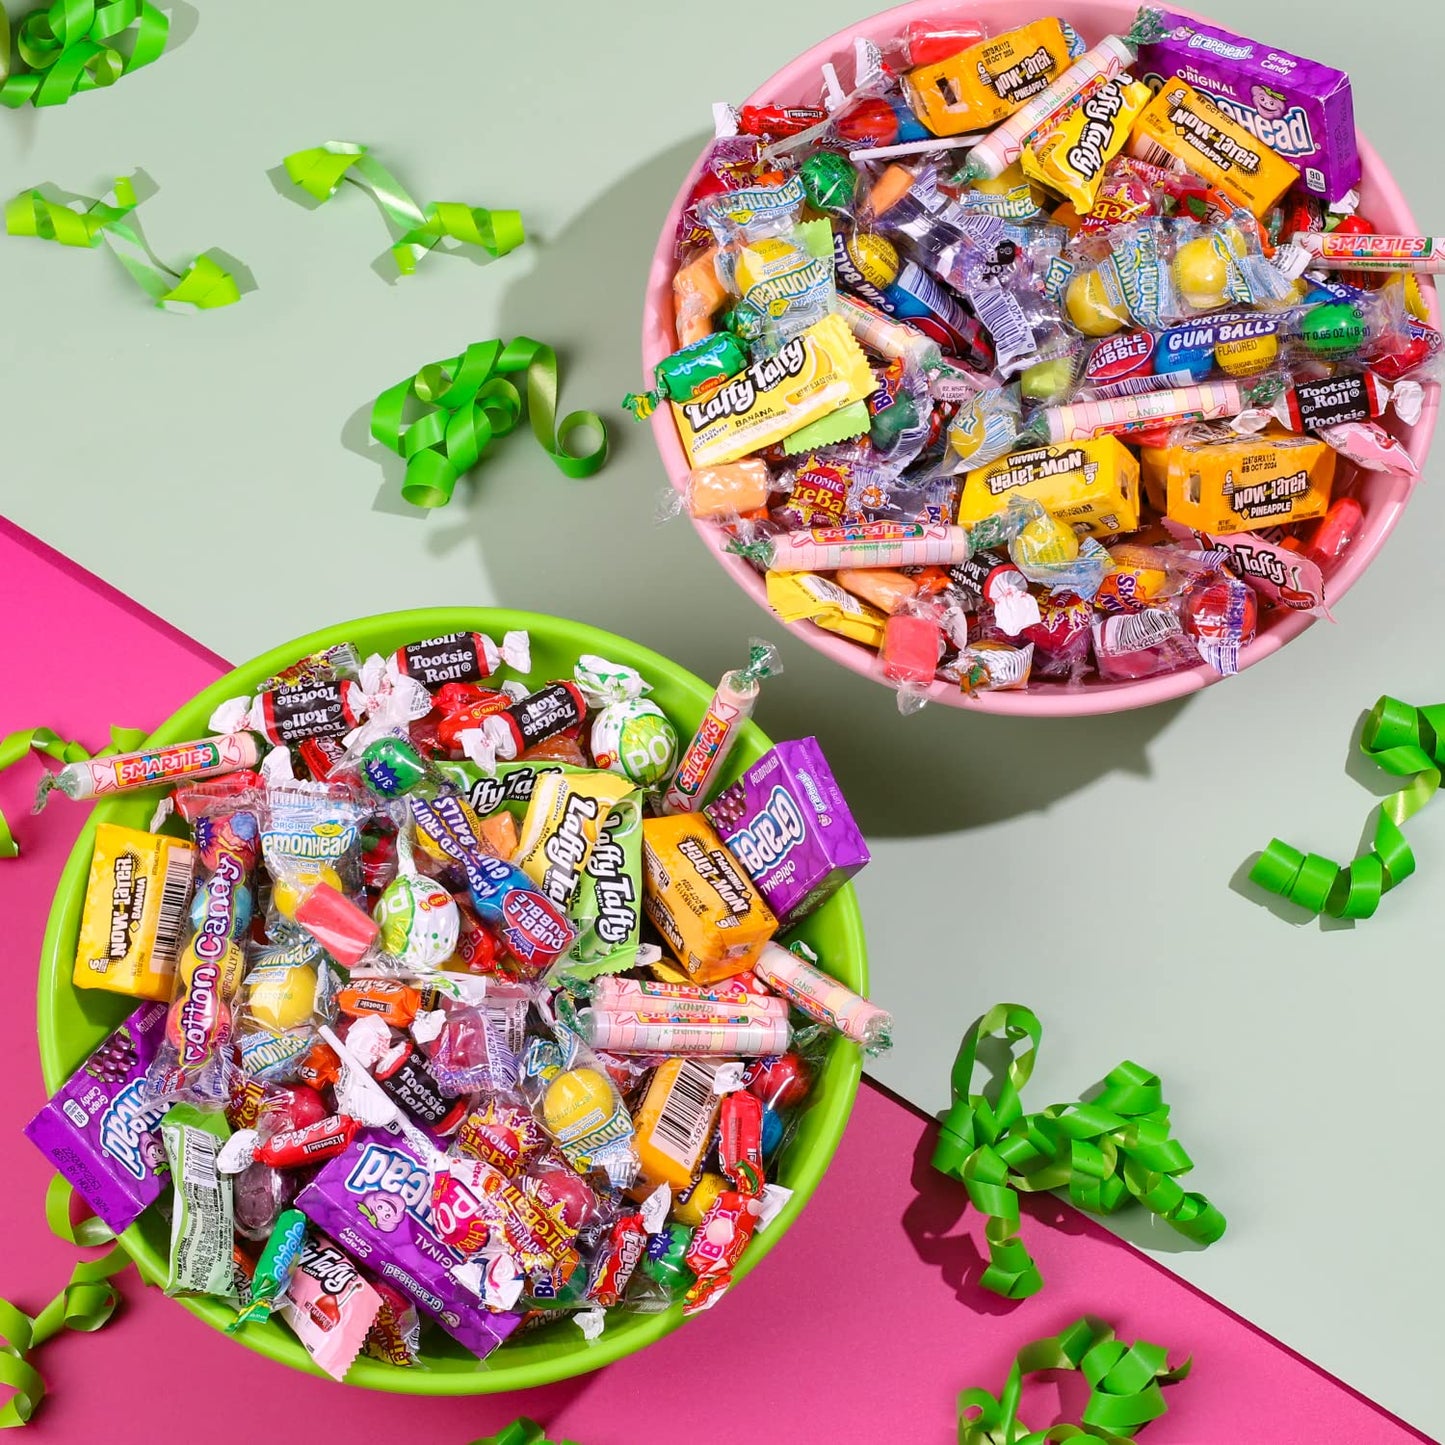 Bulk Candy Mix - Pinata Candy - 9 LB - Parade Candy Variety - Giant Bag Assorted Classic Candy - Individually Wrapped Candies - Fun Size Candy Assortment